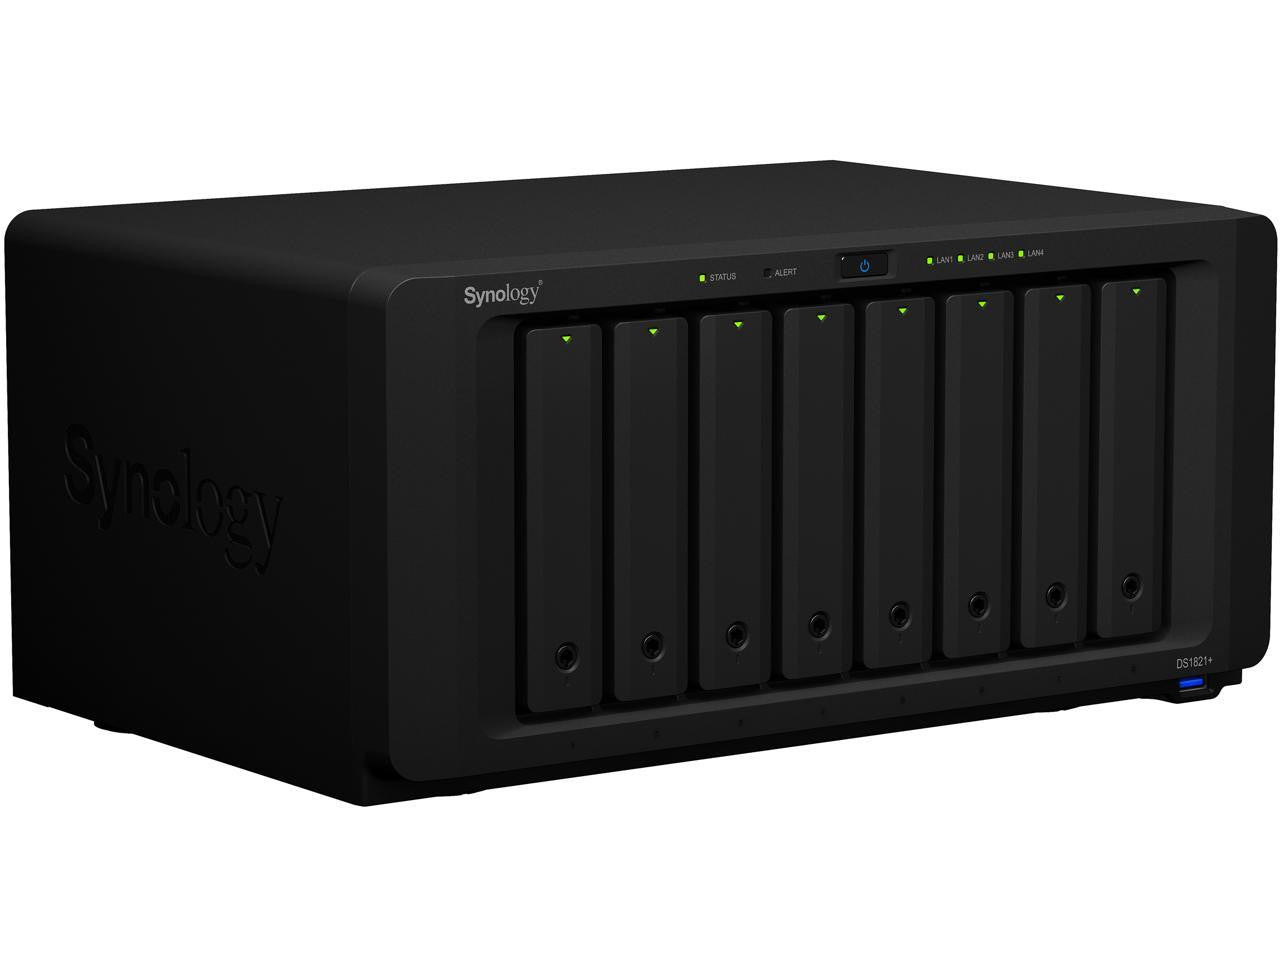 Synology DS1821+ 8-BAY DiskStation with 32GB Synology RAM and 128TB (8x16TB) Synology Enterprise HAT5300 Drives Fully Assembled and Tested